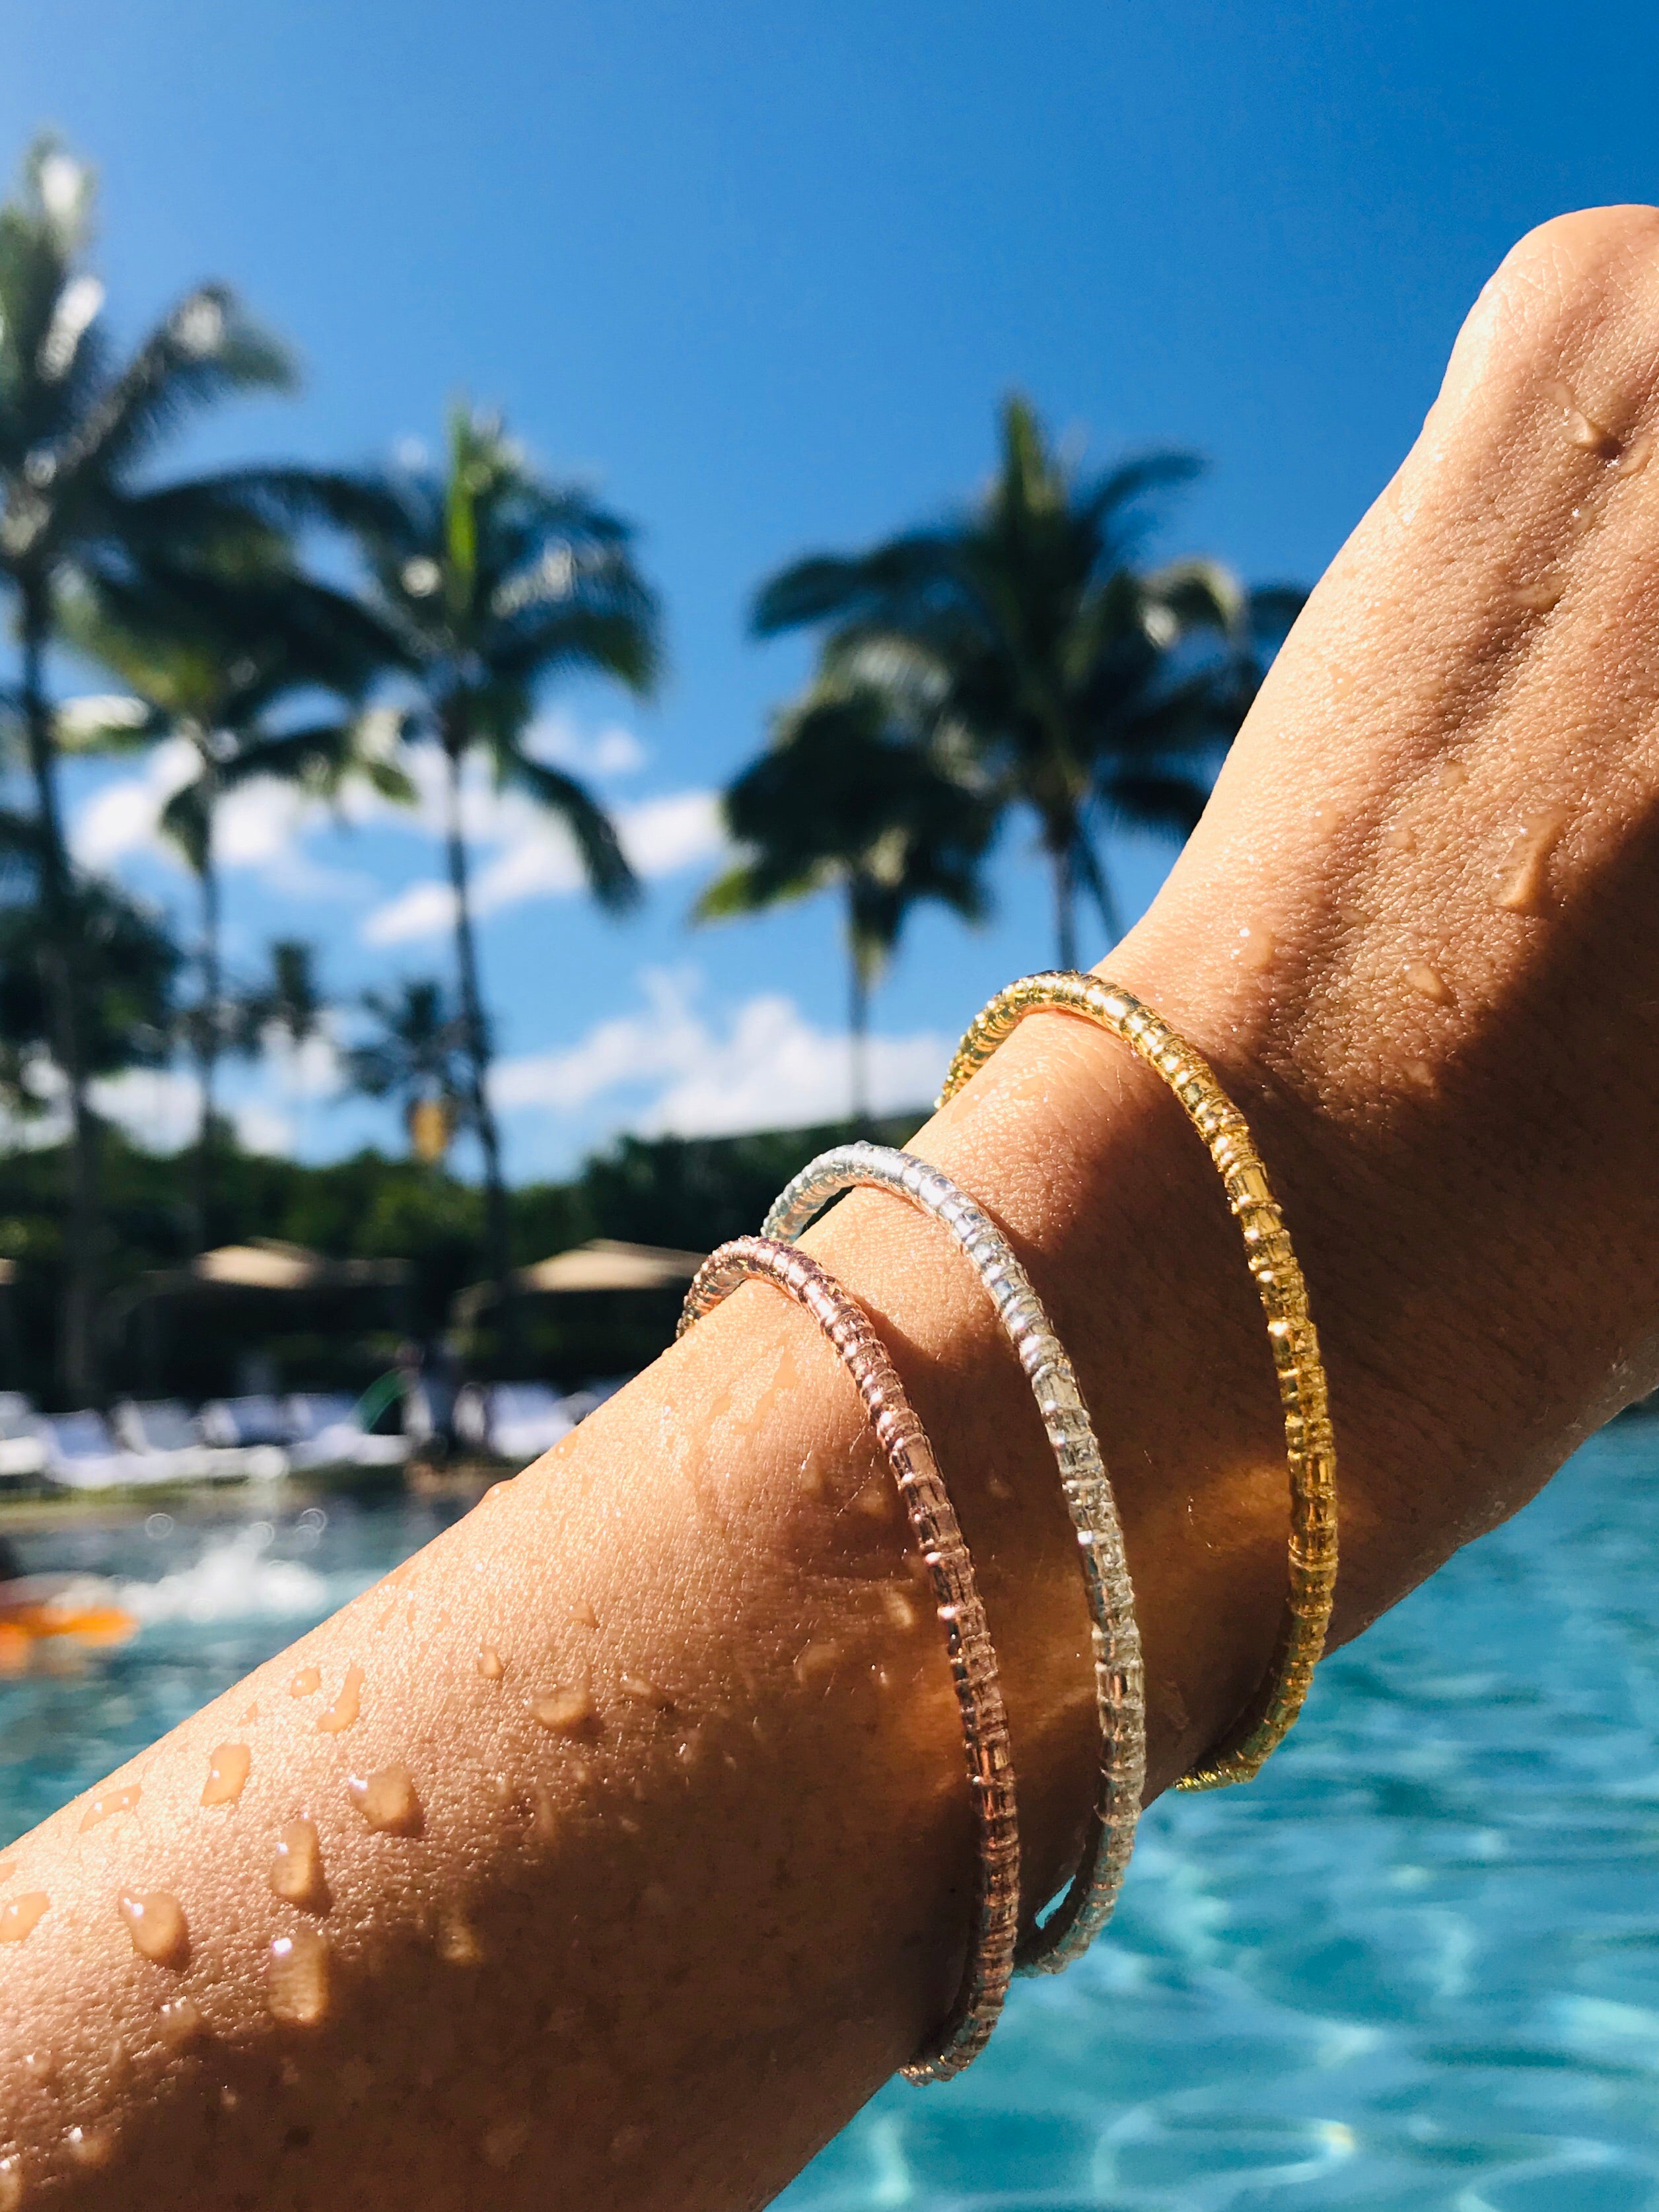 Coco Bangle, inspired by the texture of a coconut tree, Keani Hawai'i